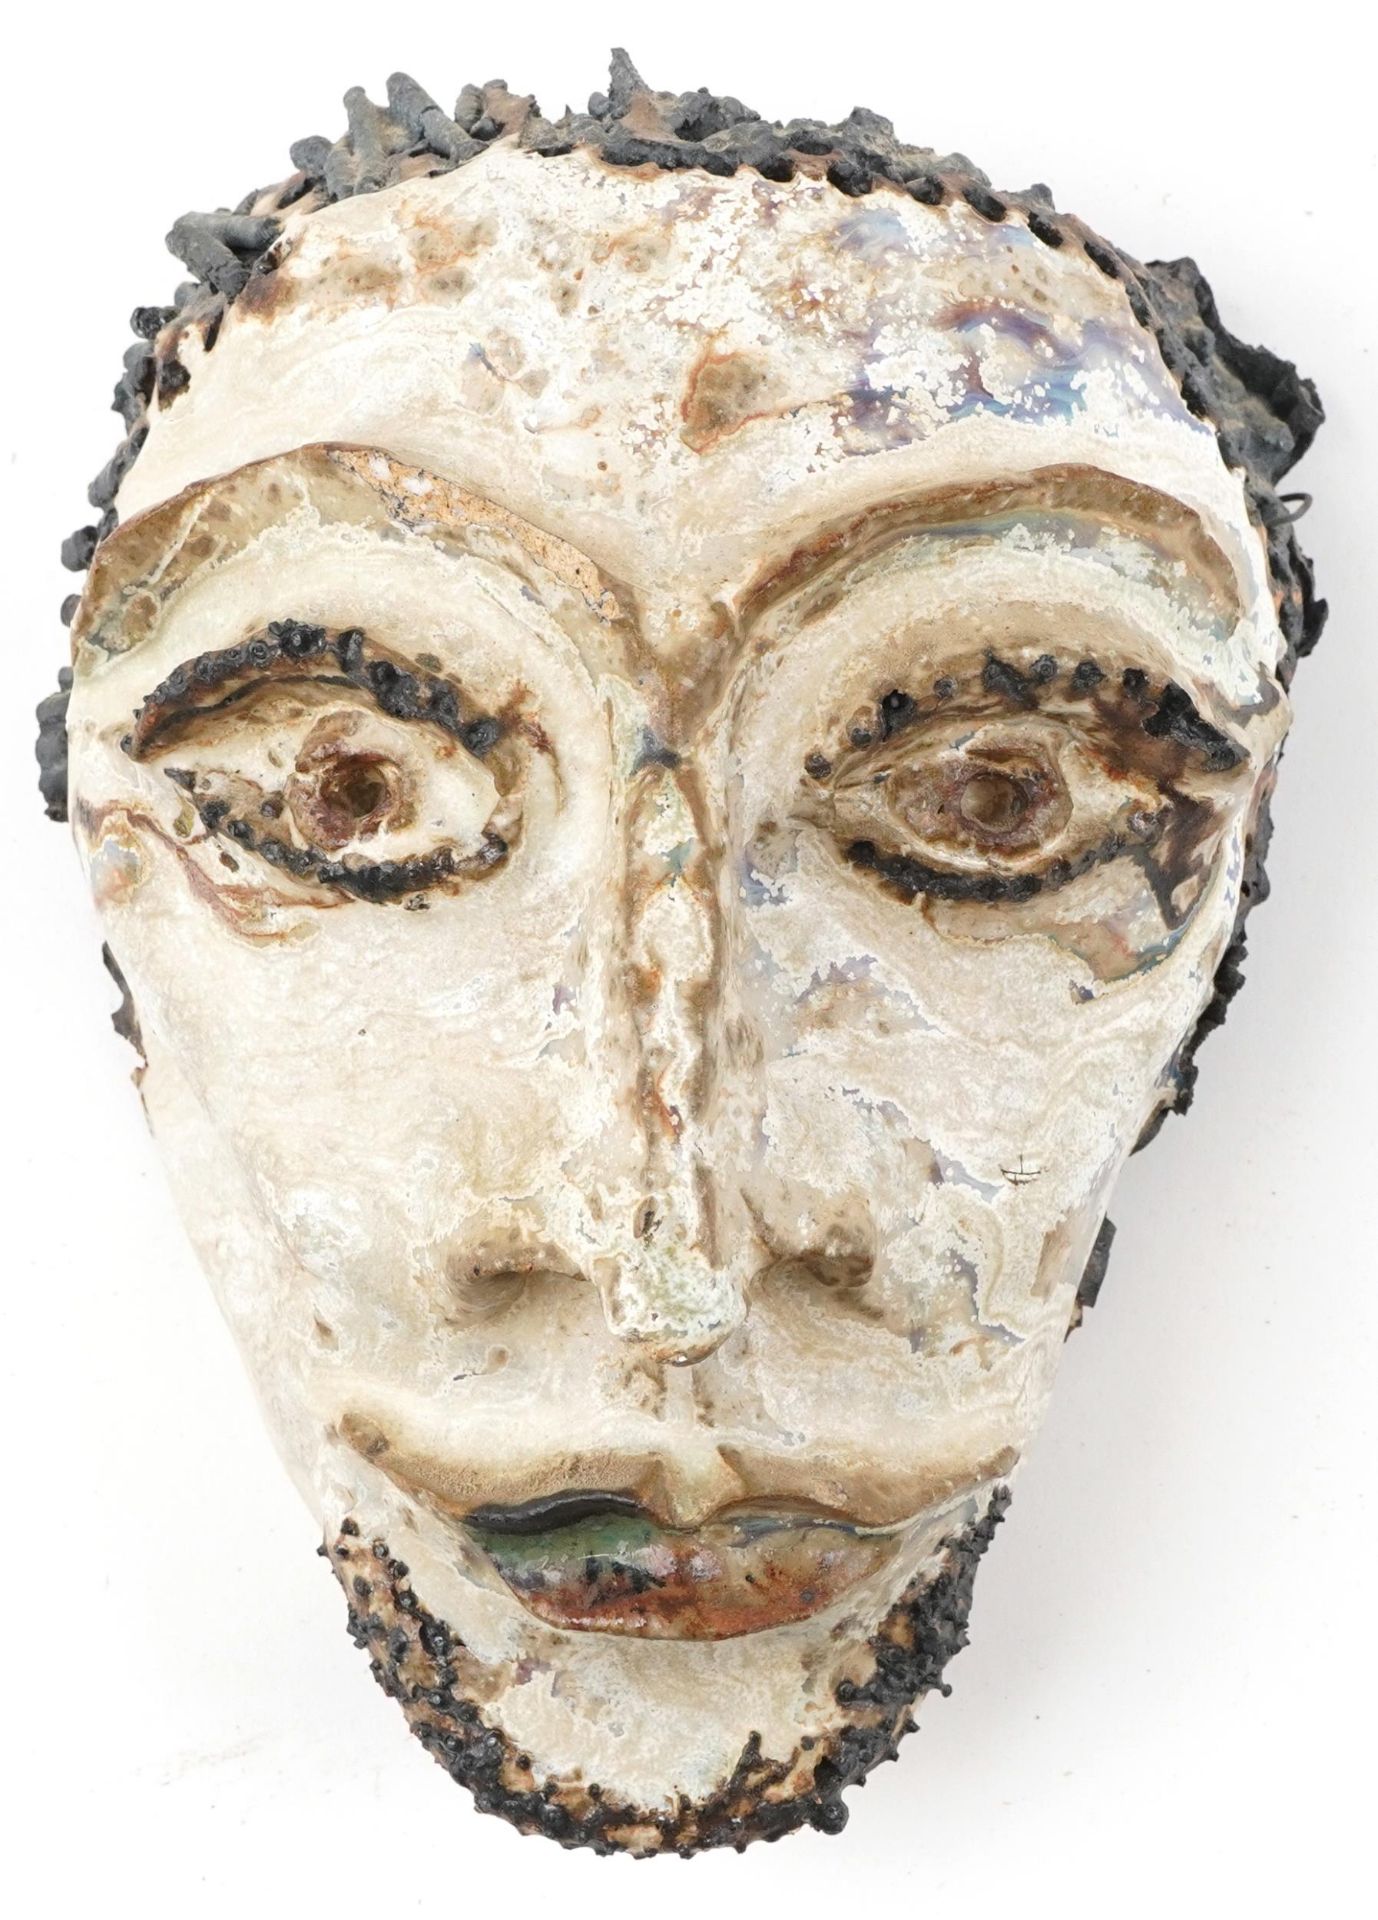 Mid century style grotesque pottery face mask, 19cm high